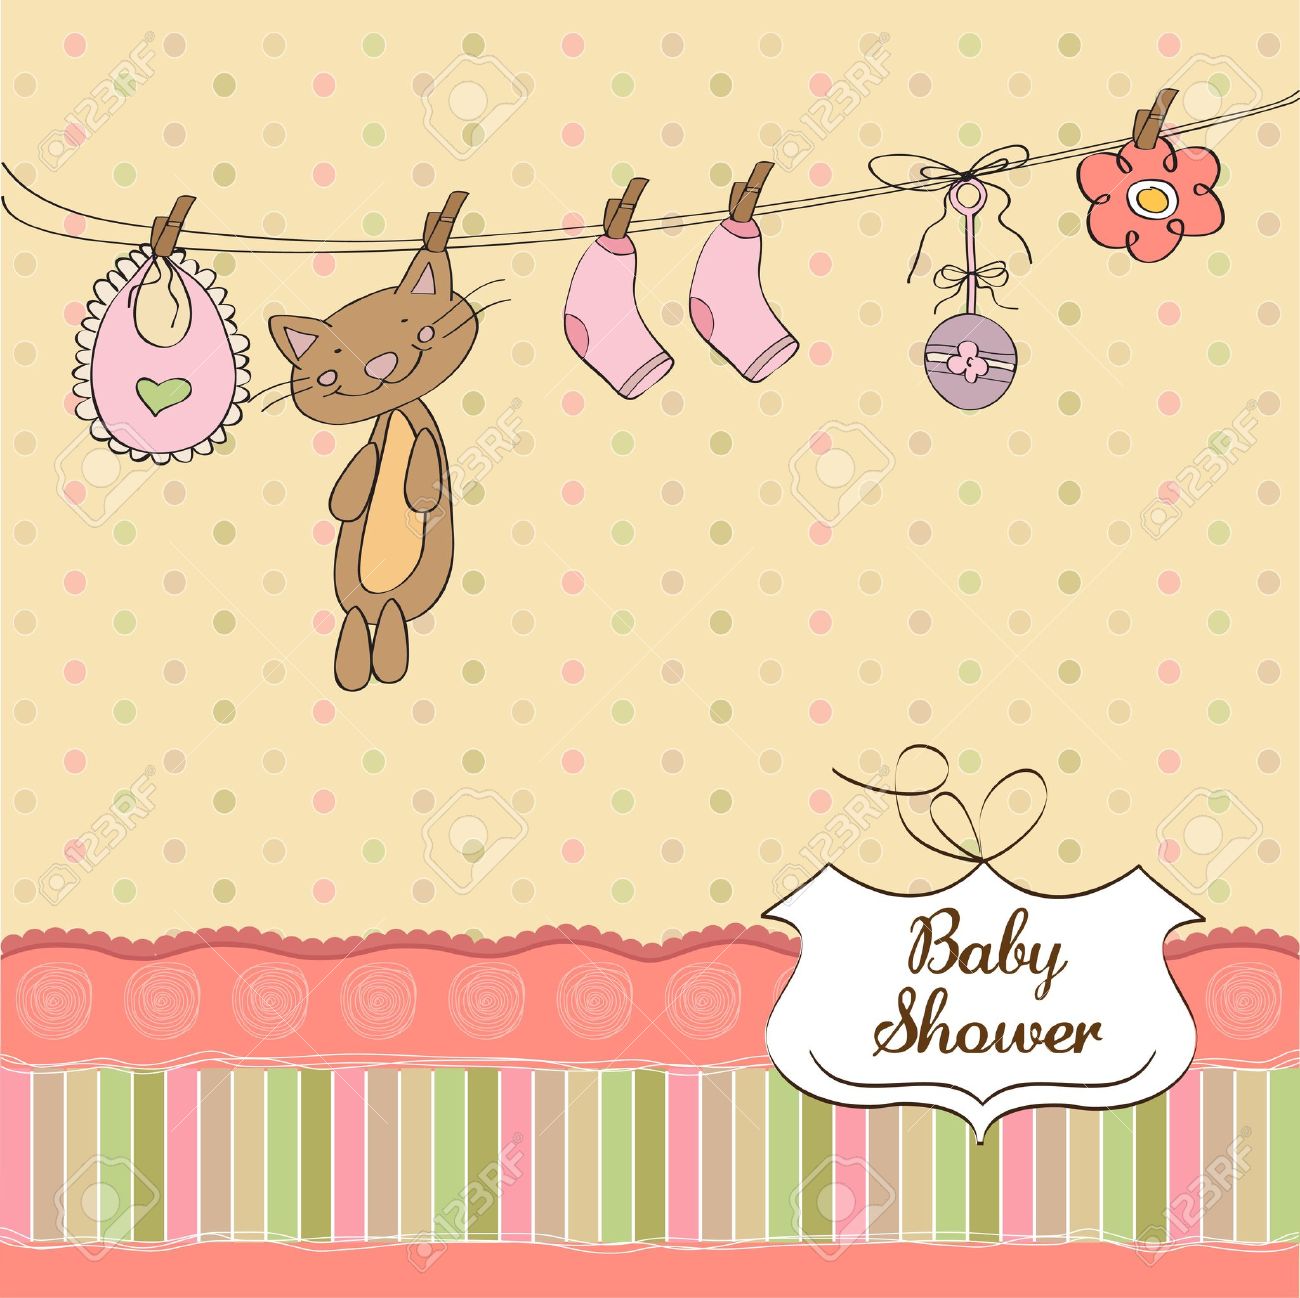 Full Size of Baby Shower:unique Baby Shower Themes Homemade Baby Shower Decorations Baby Shower Invitations Baby Girl Themes Baby Shower Ideas Baby Shower Decorations Cheap Invitations Baby Shower Pinterest Nursery Ideas Baby Shower Invitations For Boys